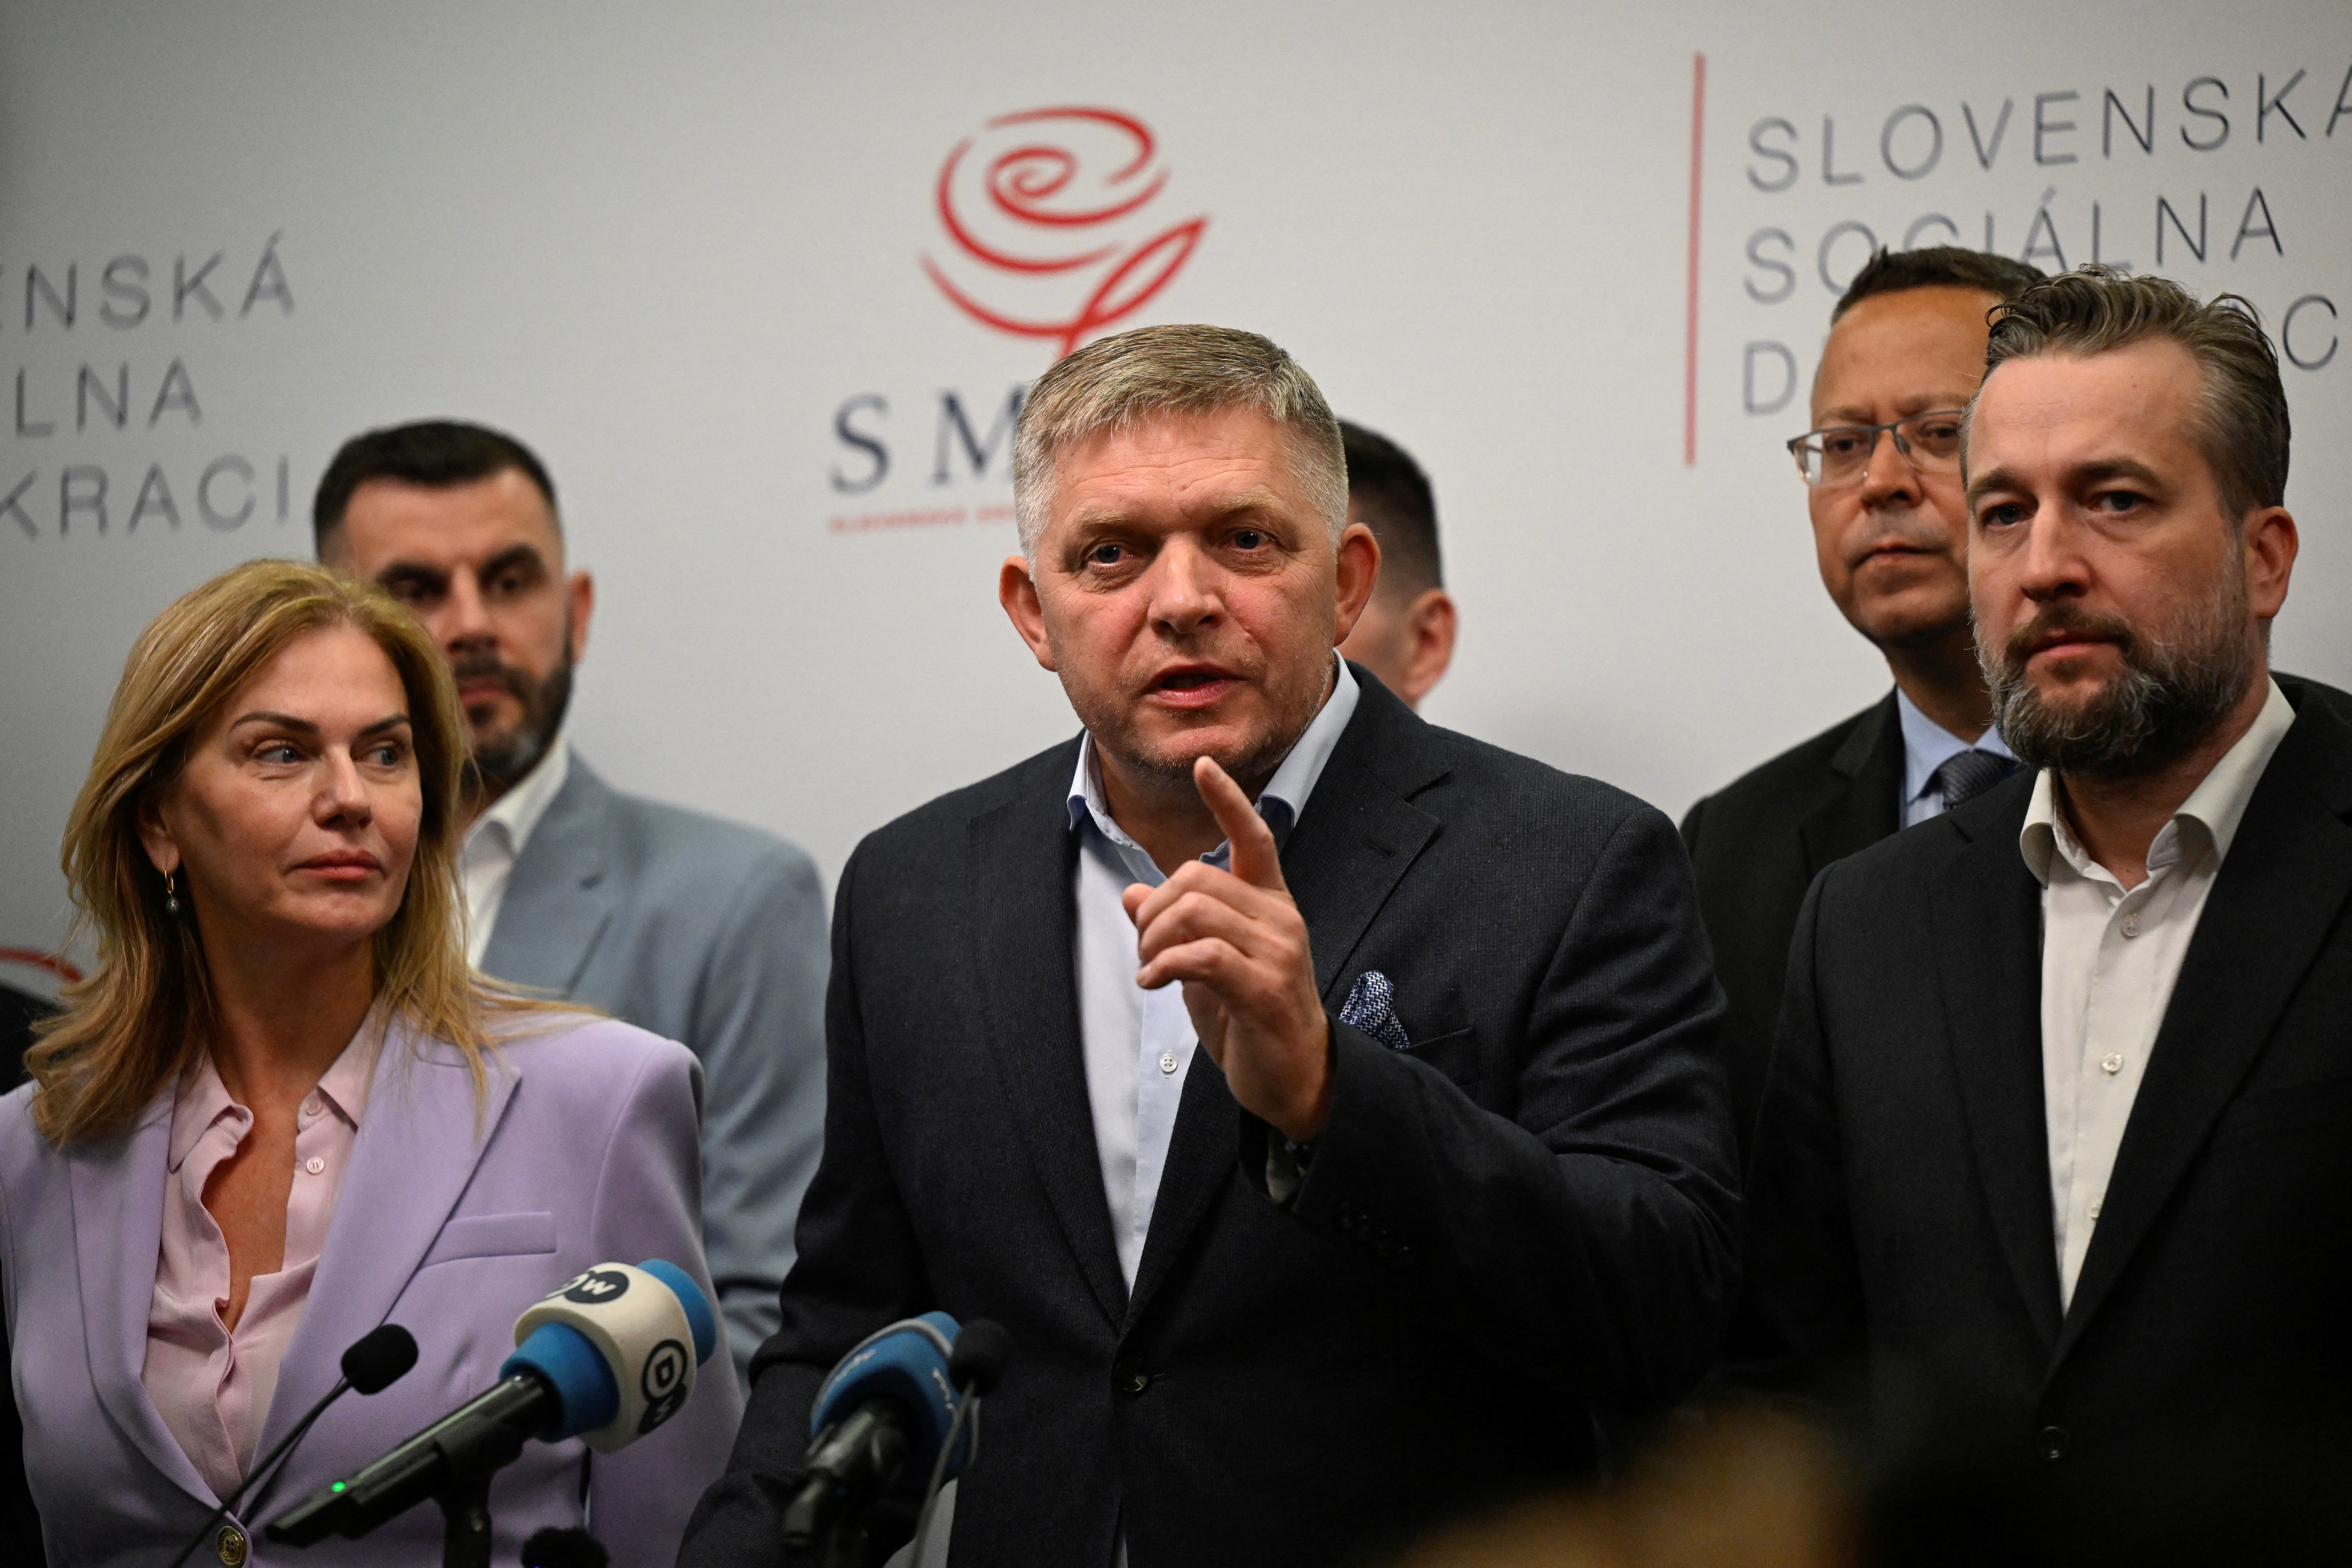 SSD party leader Robert Fico speaks during a press conference after the country's  parliamentary elections. Radovan Stoklasa/ Reuters